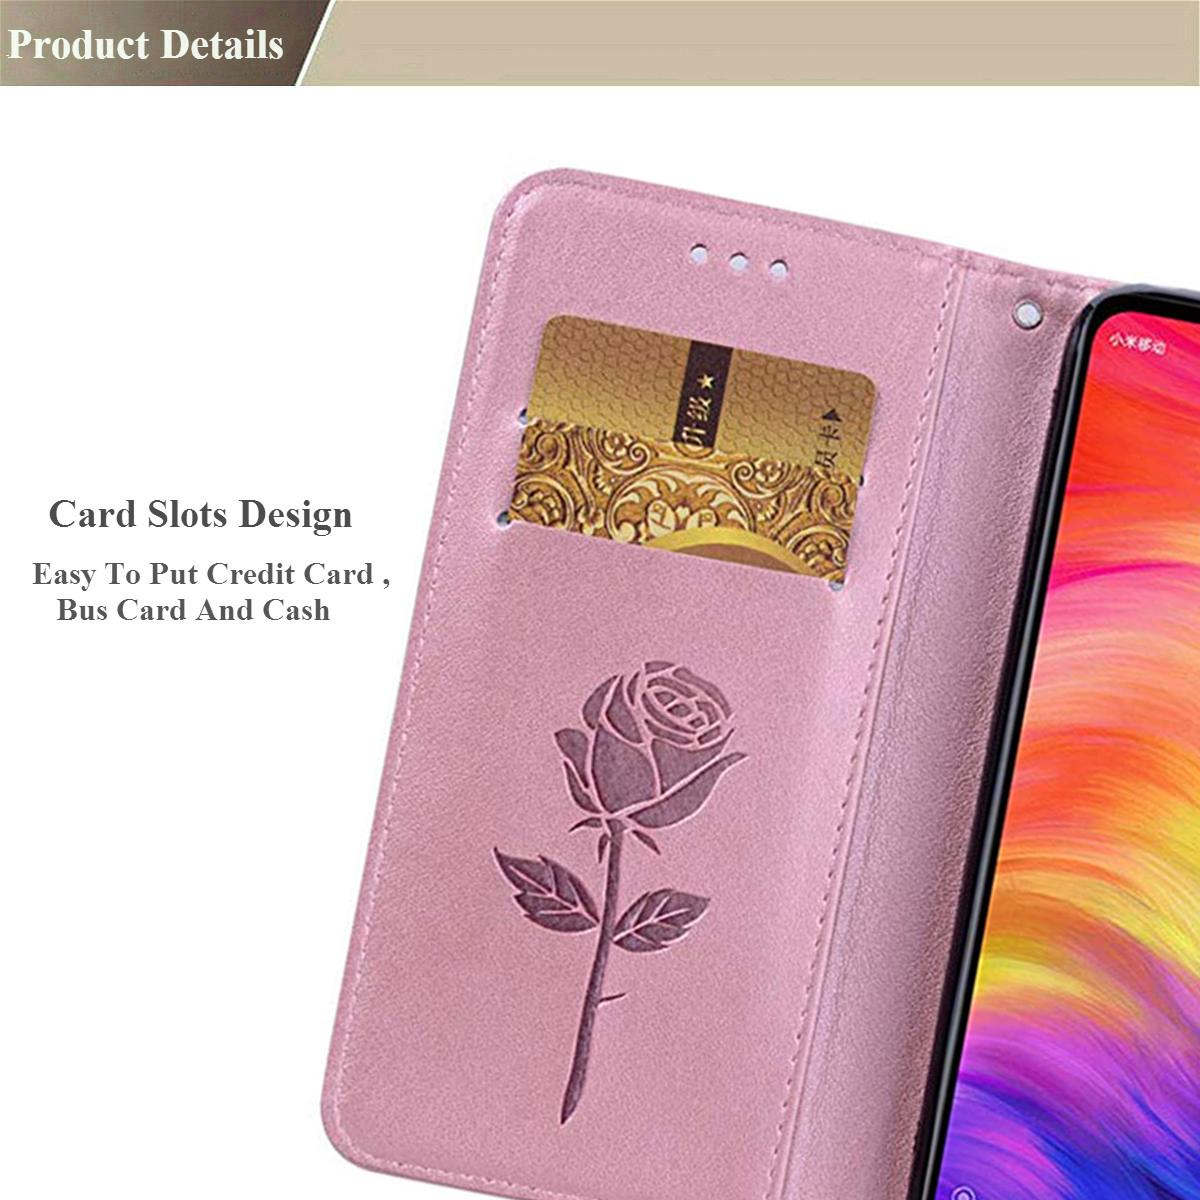 Изображение товара: For Samsung Galaxy A50 A30 A10 A70 Case Leather Flip Stand Magnetic Wallet Cover On For Samsung A50 2019 Sansung Sumsung Galax